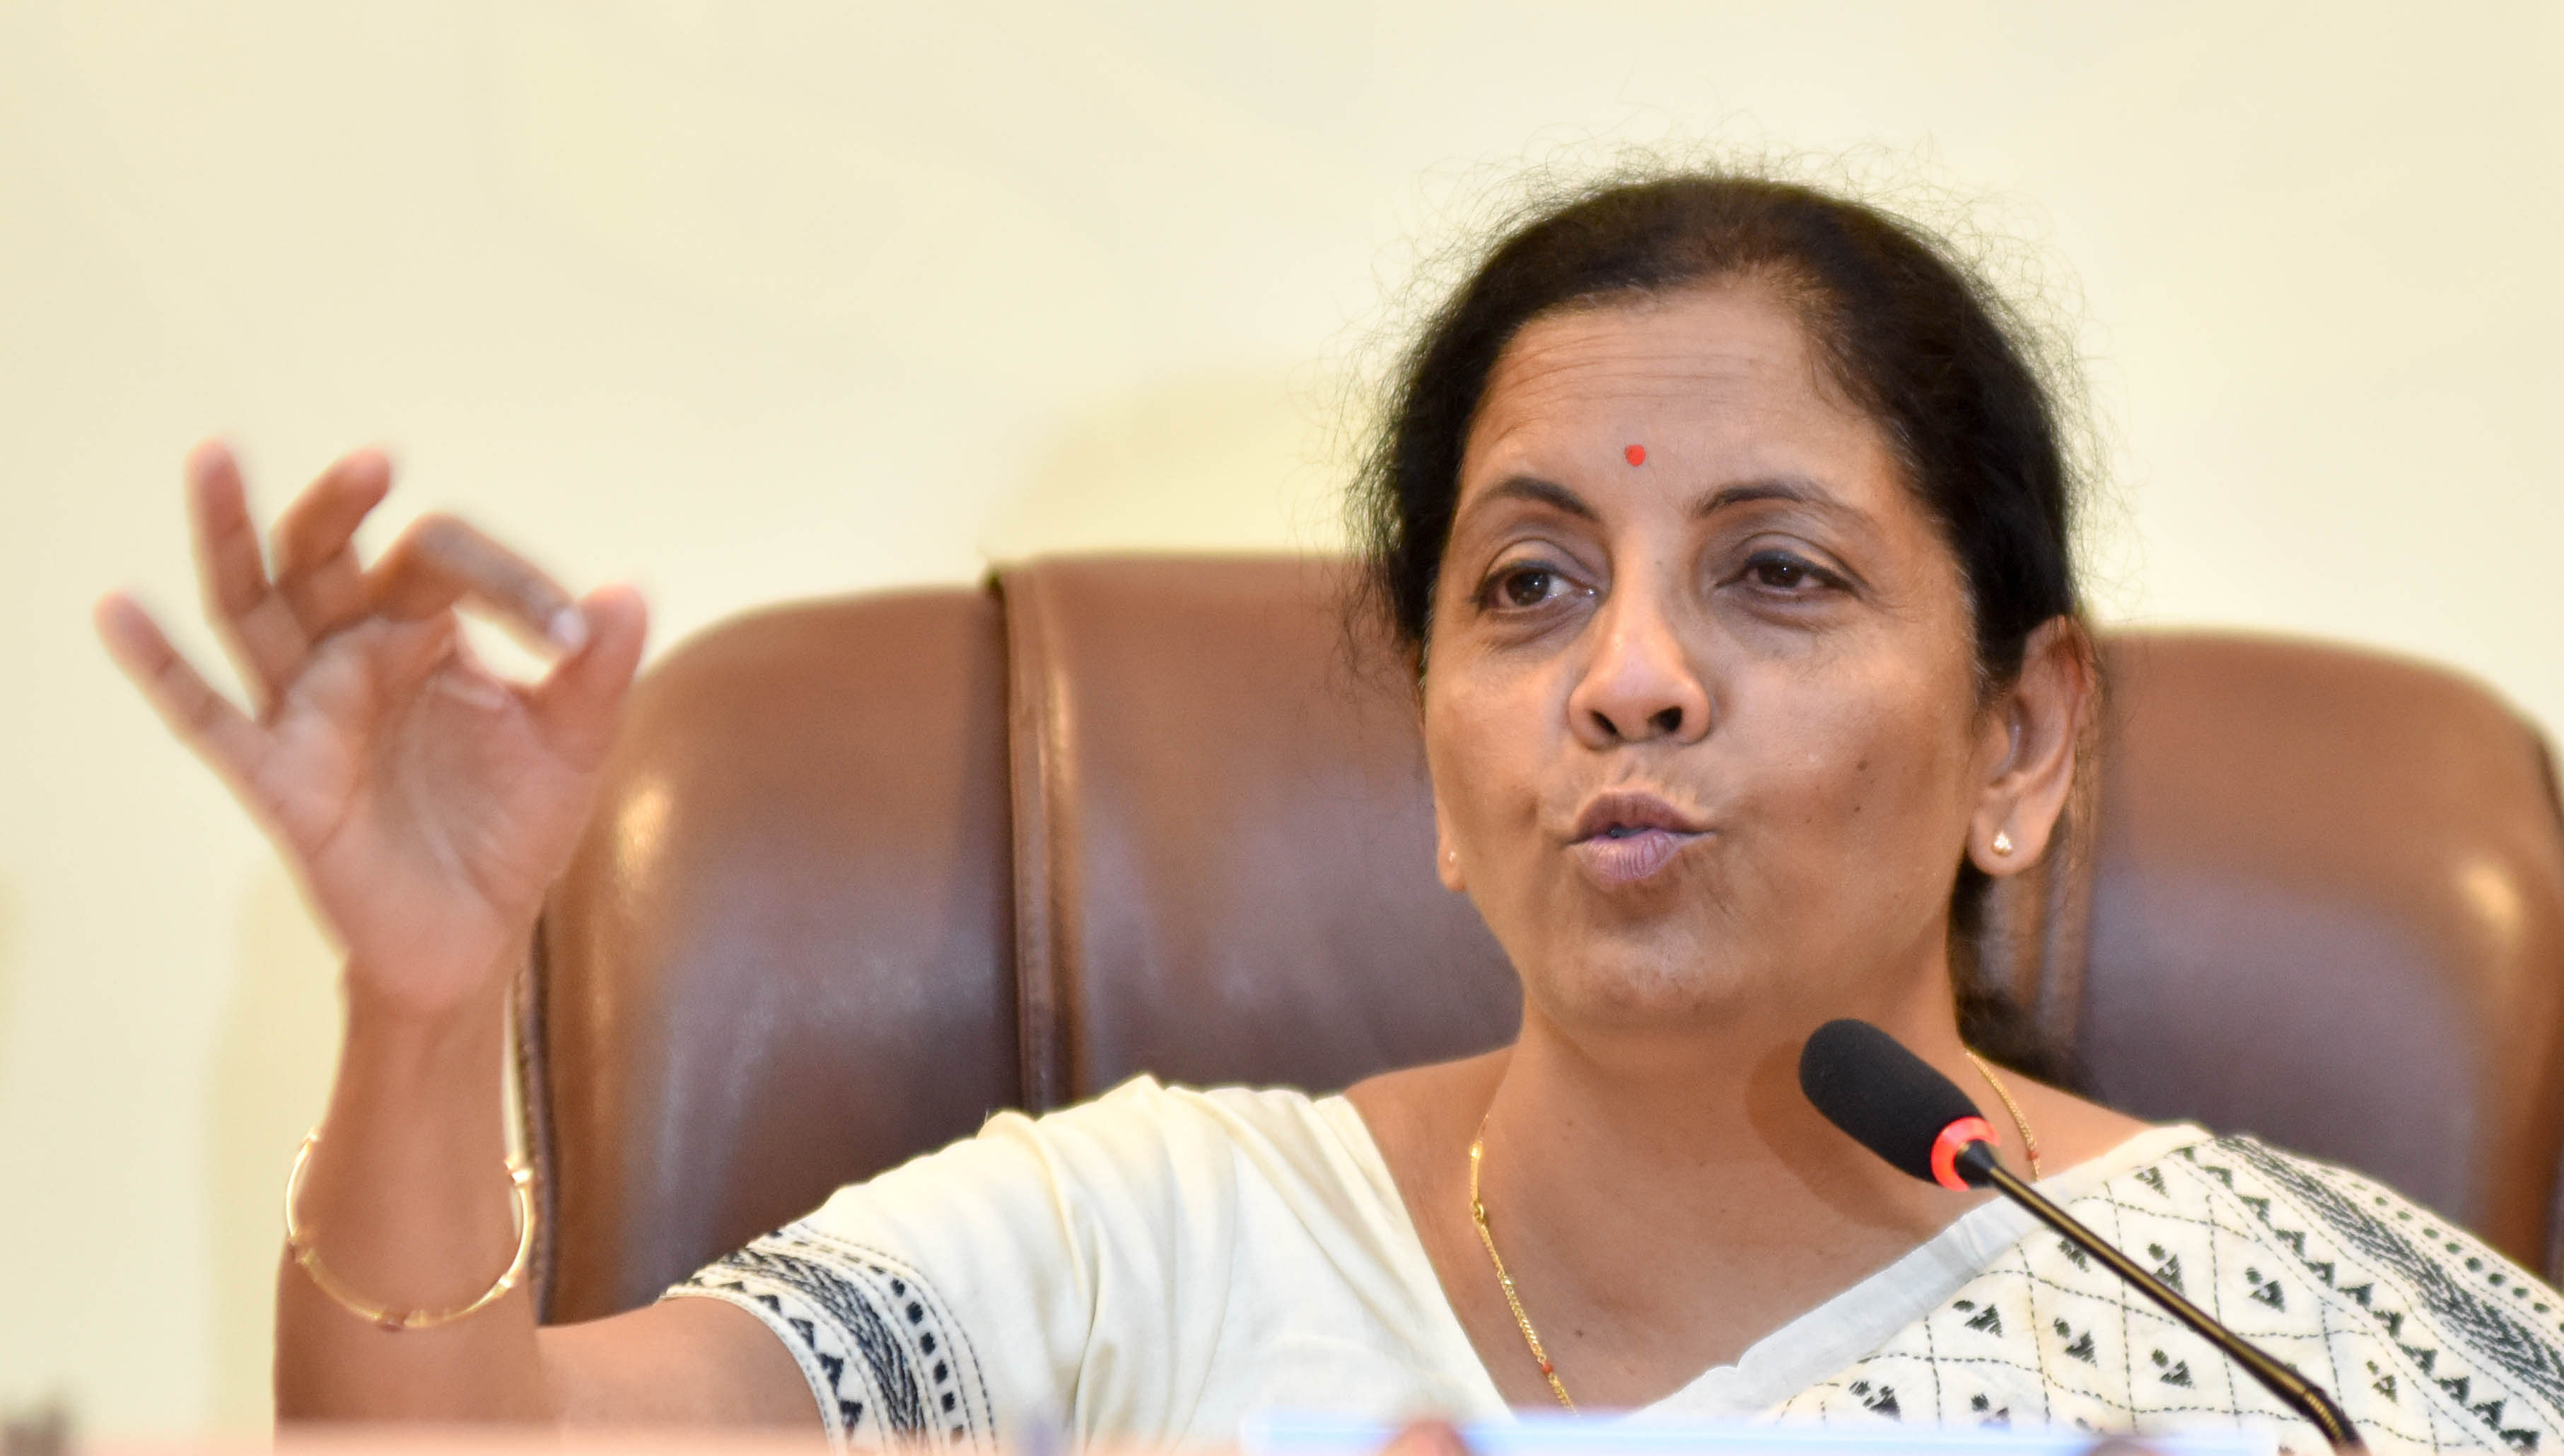 With an aim to boost the sales of Electric Vehicles (EVs), Nirmala Sitharaman, in her maiden Parliament Budget speech, announced tax sops for loans to buy them. (PTI File Photo)